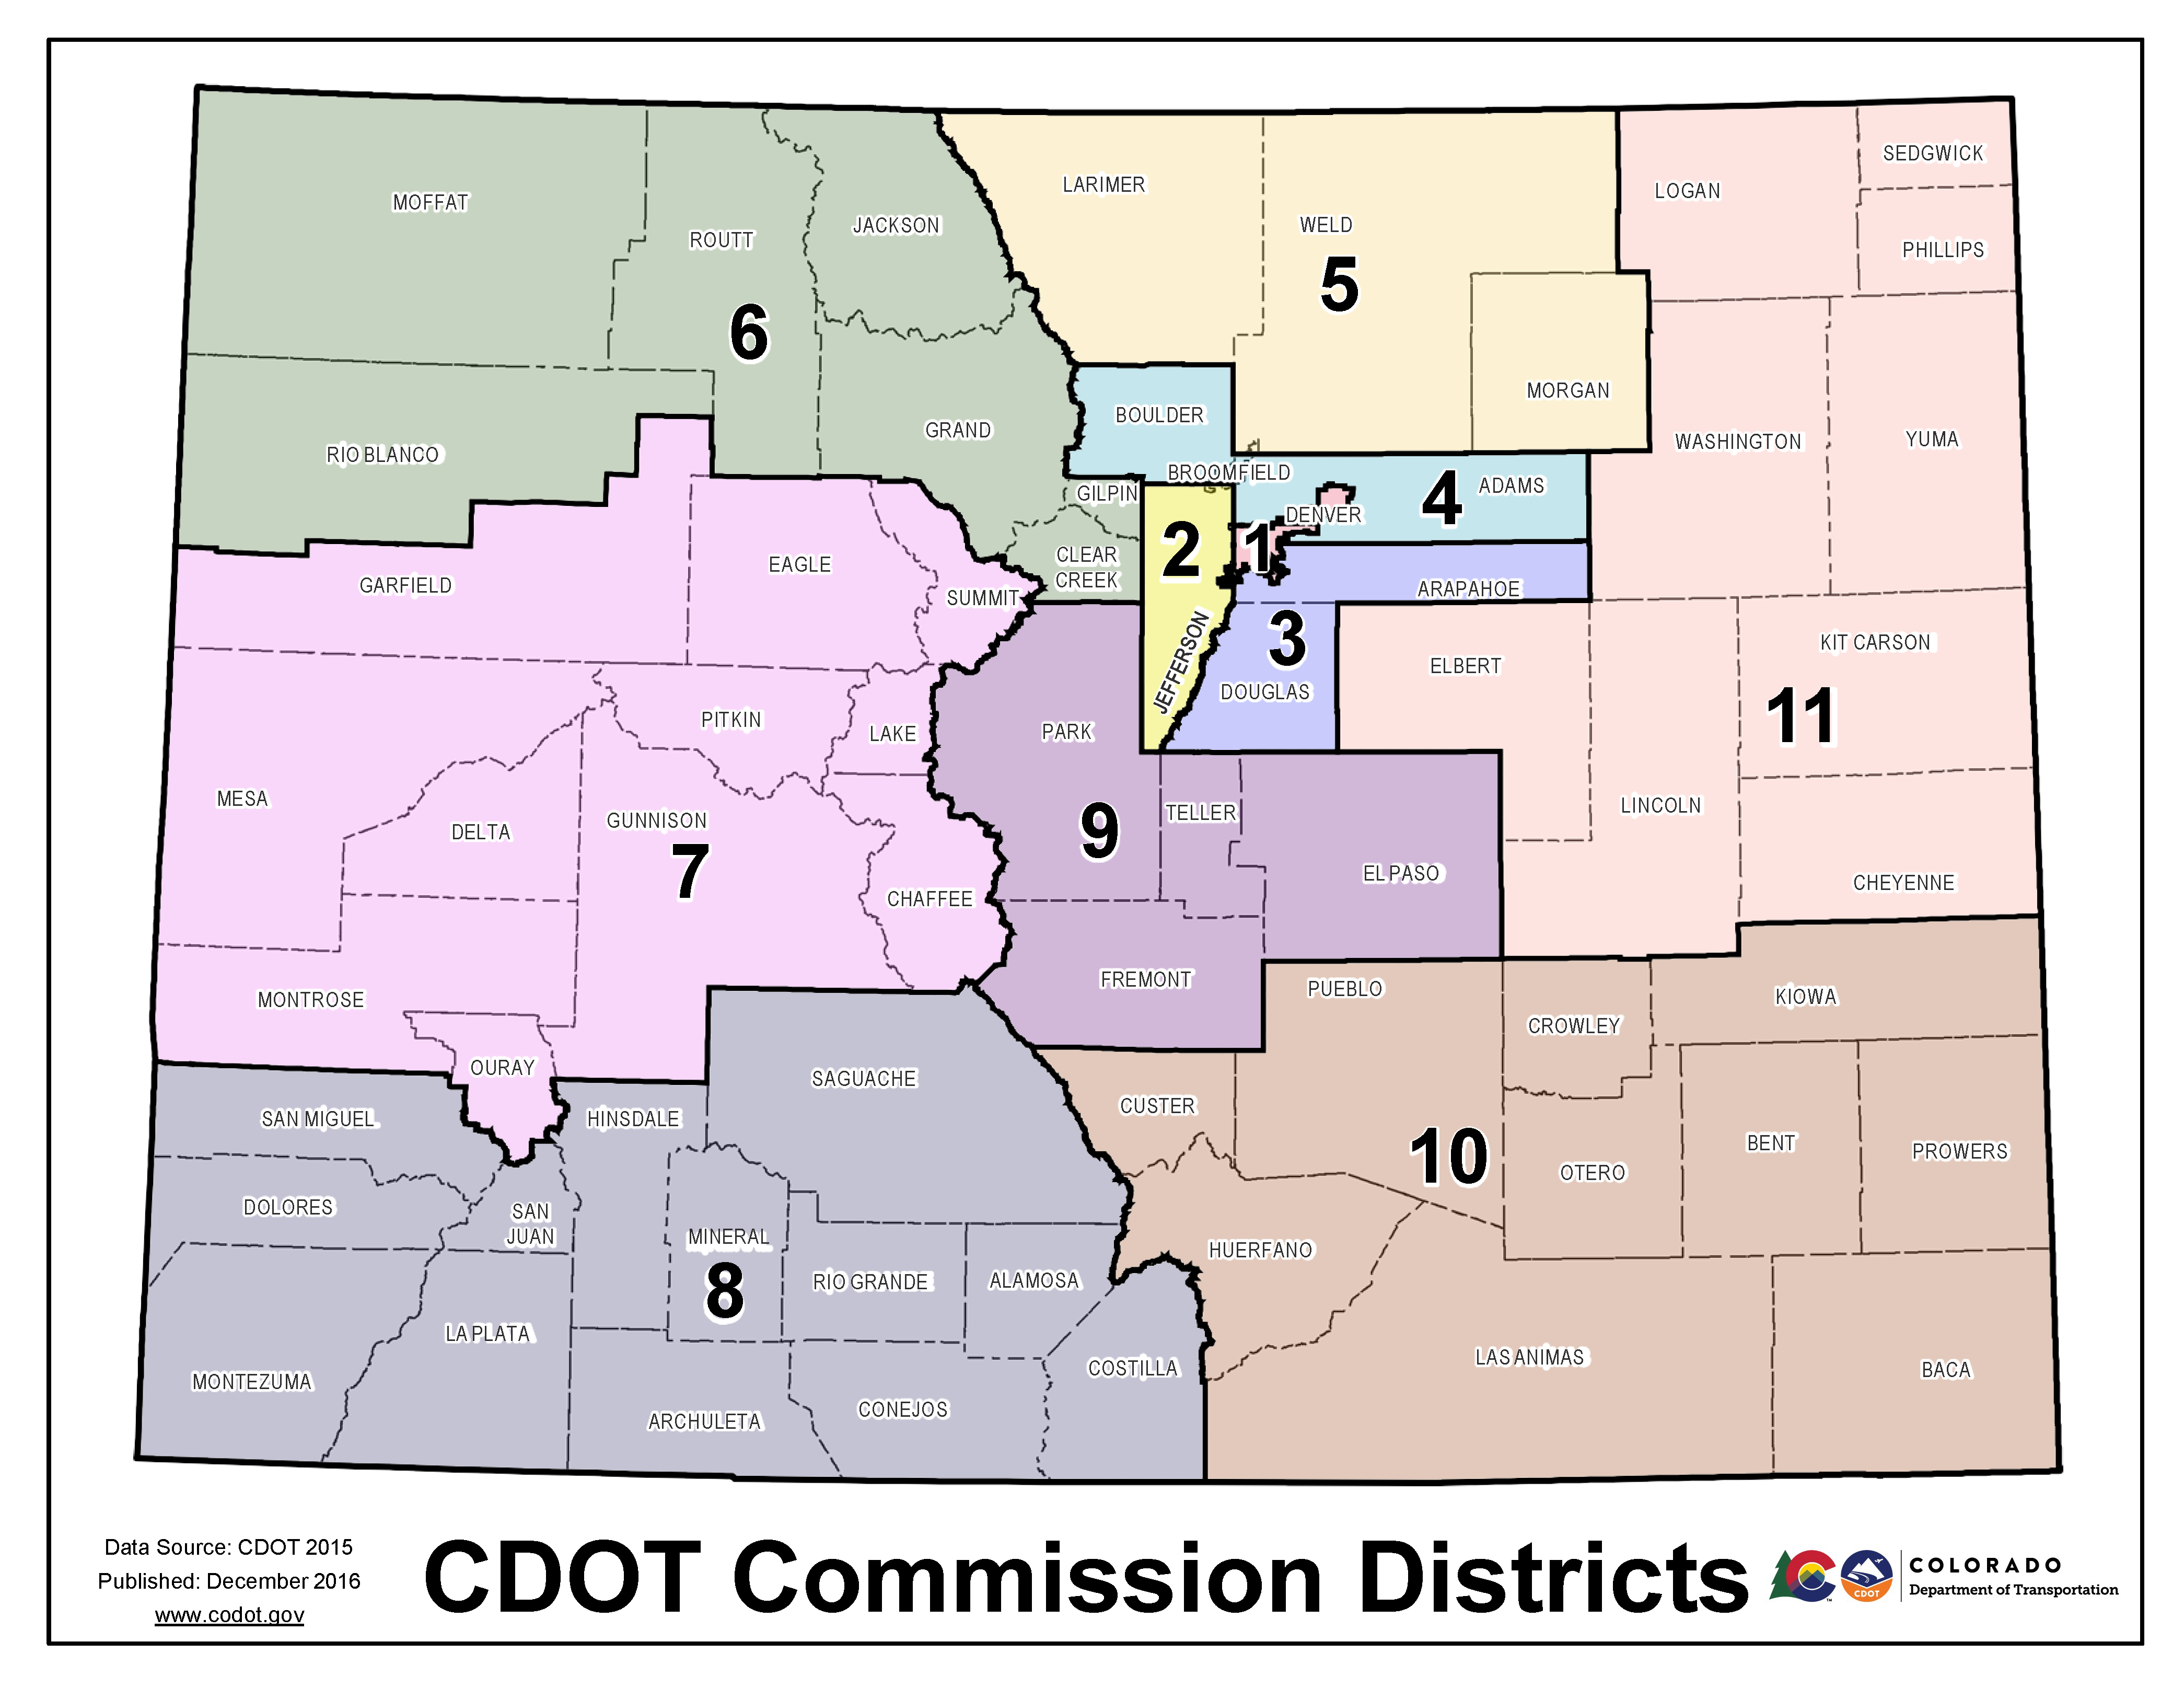 a - CDOT Commission District Map.jpg detail image